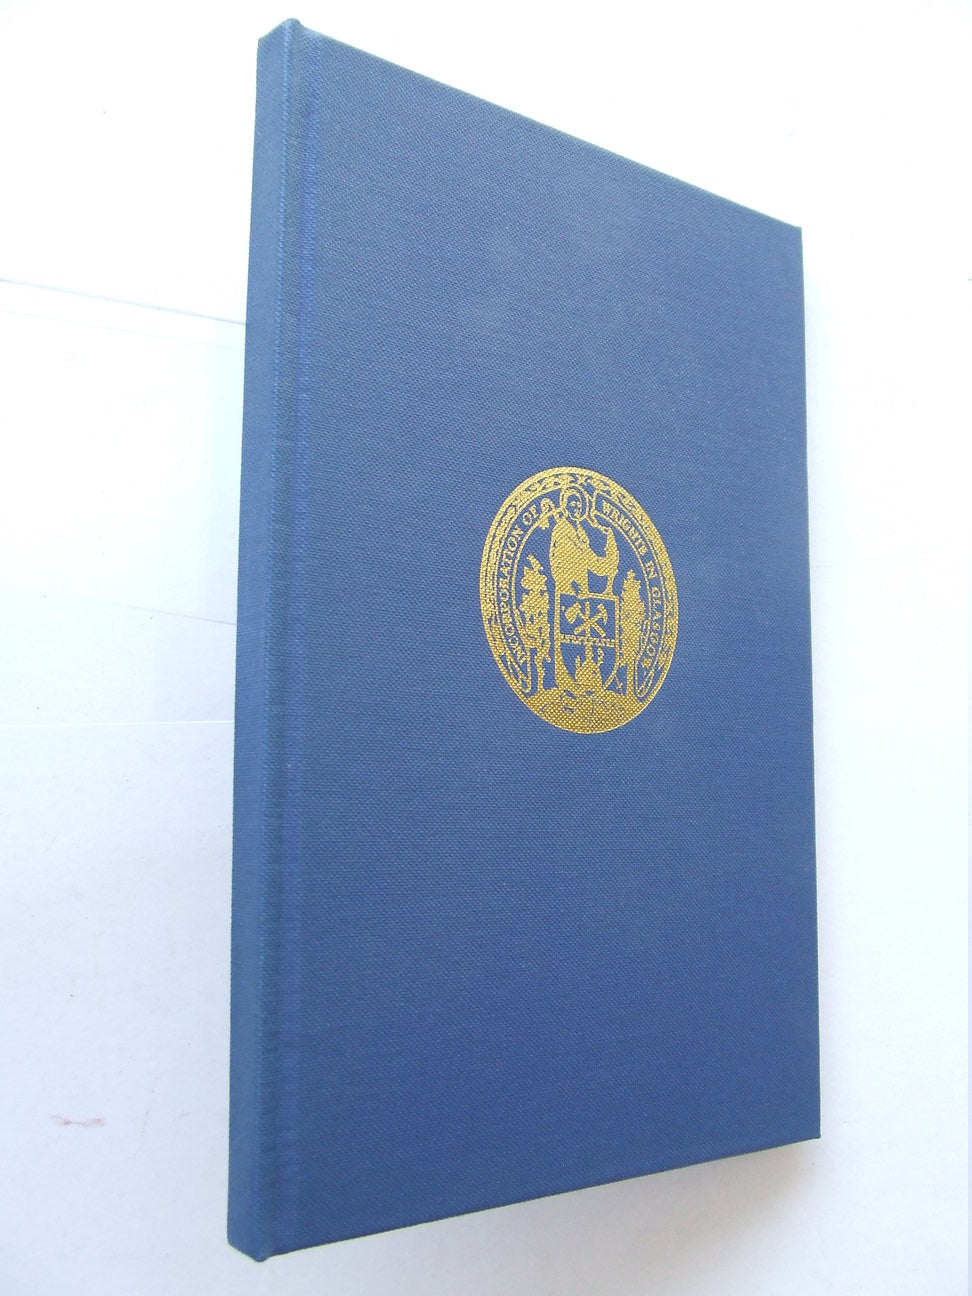 The Incorporation of Wrights in Glasgow [8th edition]